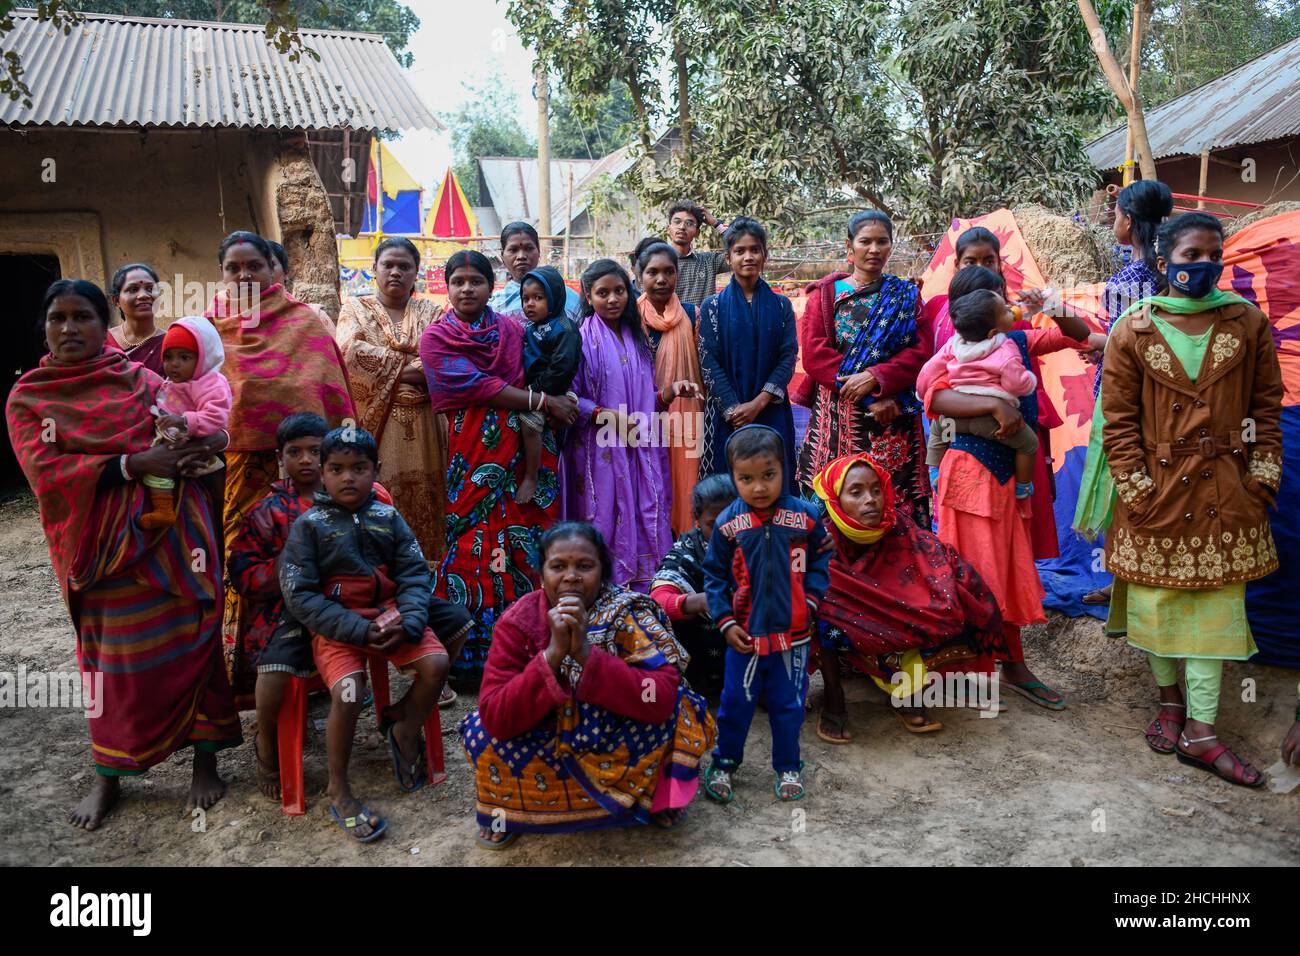 Rajshahi, Bangladesh. 28th Dec, 2021. Santali people posing for a group photo at a wedding in Rajshahi.Santal tribe is an ethnic group native to eastern India. Santals are the largest tribe in the Jharkhand state of India in terms of population and are also found in the states of Assam, Tripura, Bihar, Odisha and West Bengal. They are the largest ethnic minority in northern Bangladesh's Rajshahi Division and Rangpur Division. Credit: SOPA Images Limited/Alamy Live News Stock Photo